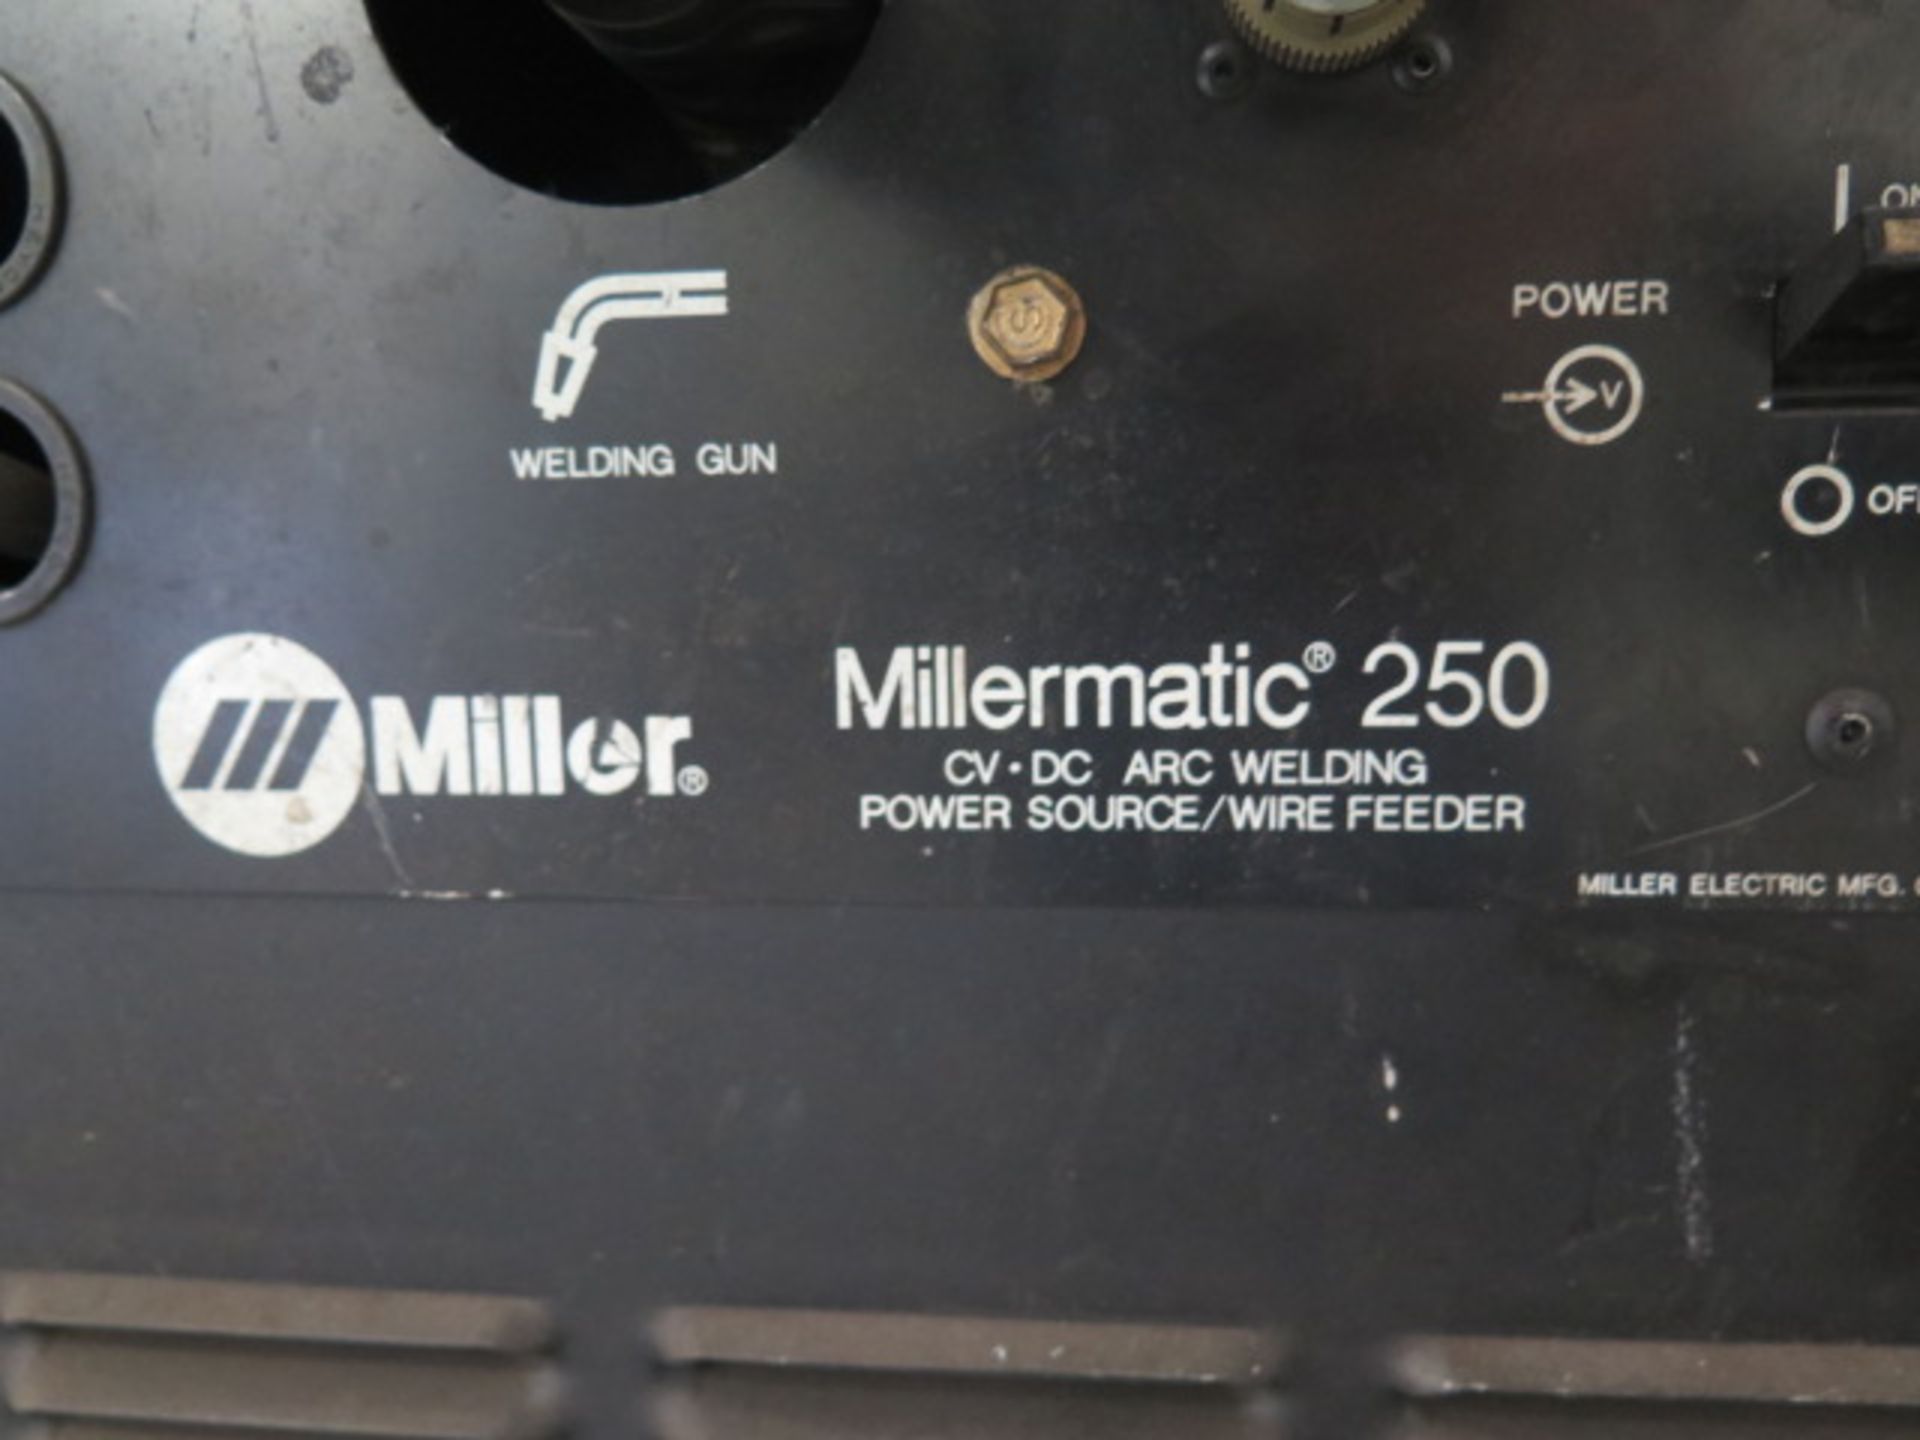 Miller Millermatic 250 CV-DC Arc welding Power Source and Wire Feeder s/n KD473155 - Image 5 of 5